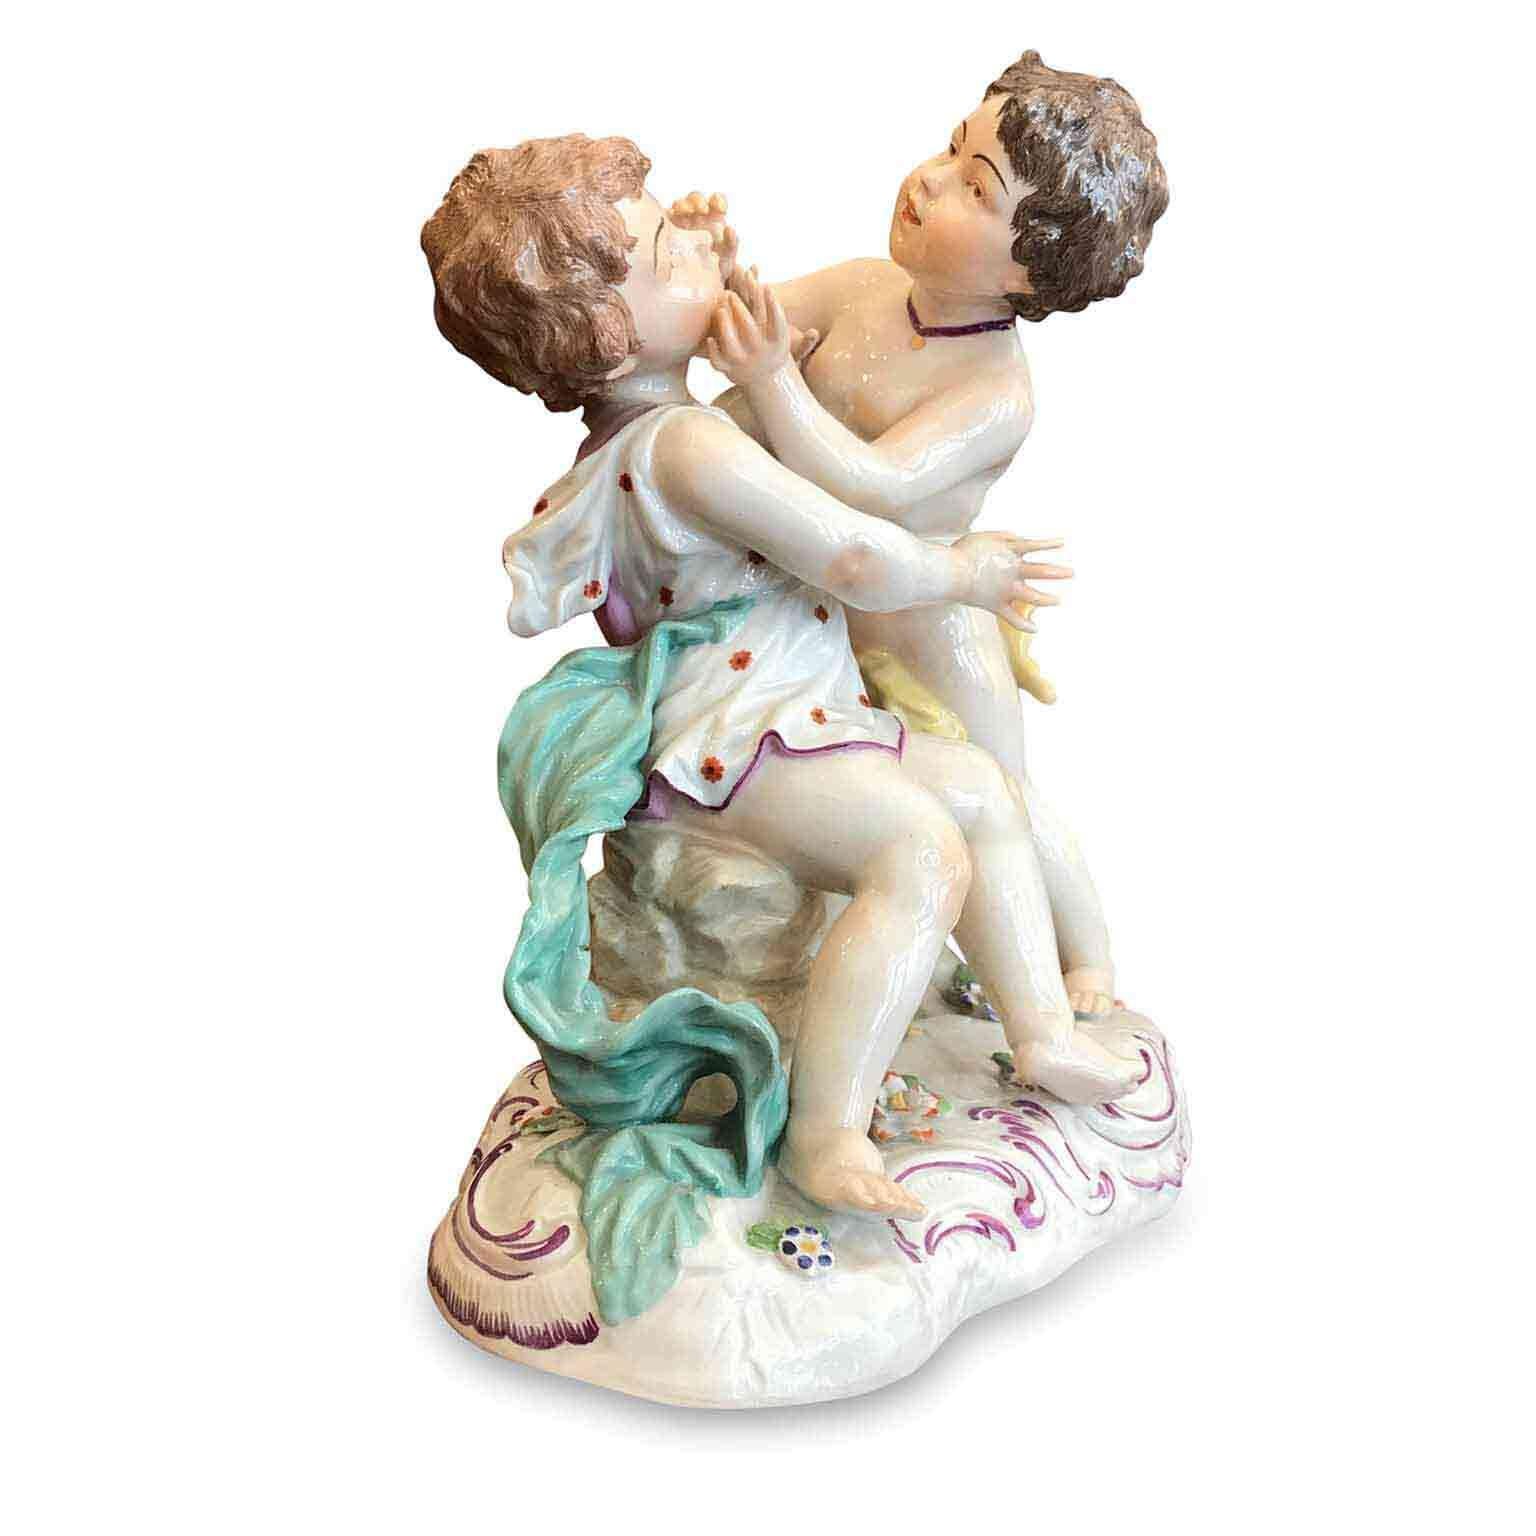 Romantic 20th Century German Porcelain Group with Putti by Passau Manufacture For Sale